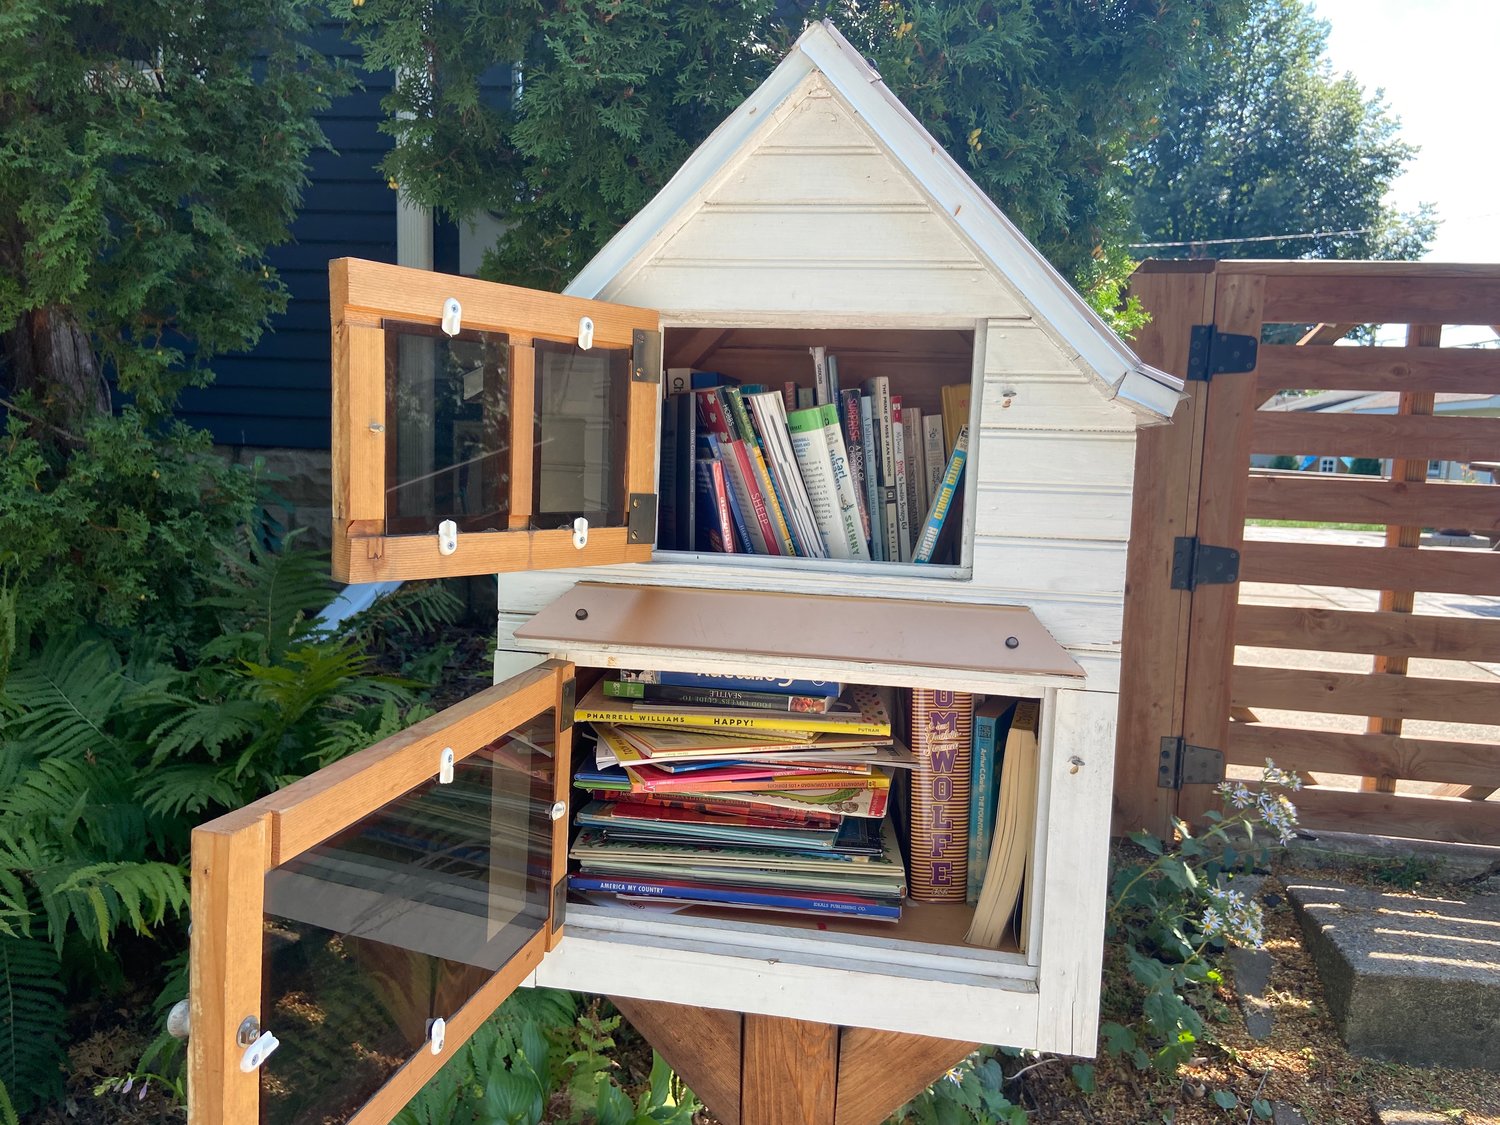 There are more than 150 Little Free Libraries and counting in the southwest Minneapolis area. Stewards of the libraries help provide access to books for everyone. The one above is located in Kingfield.